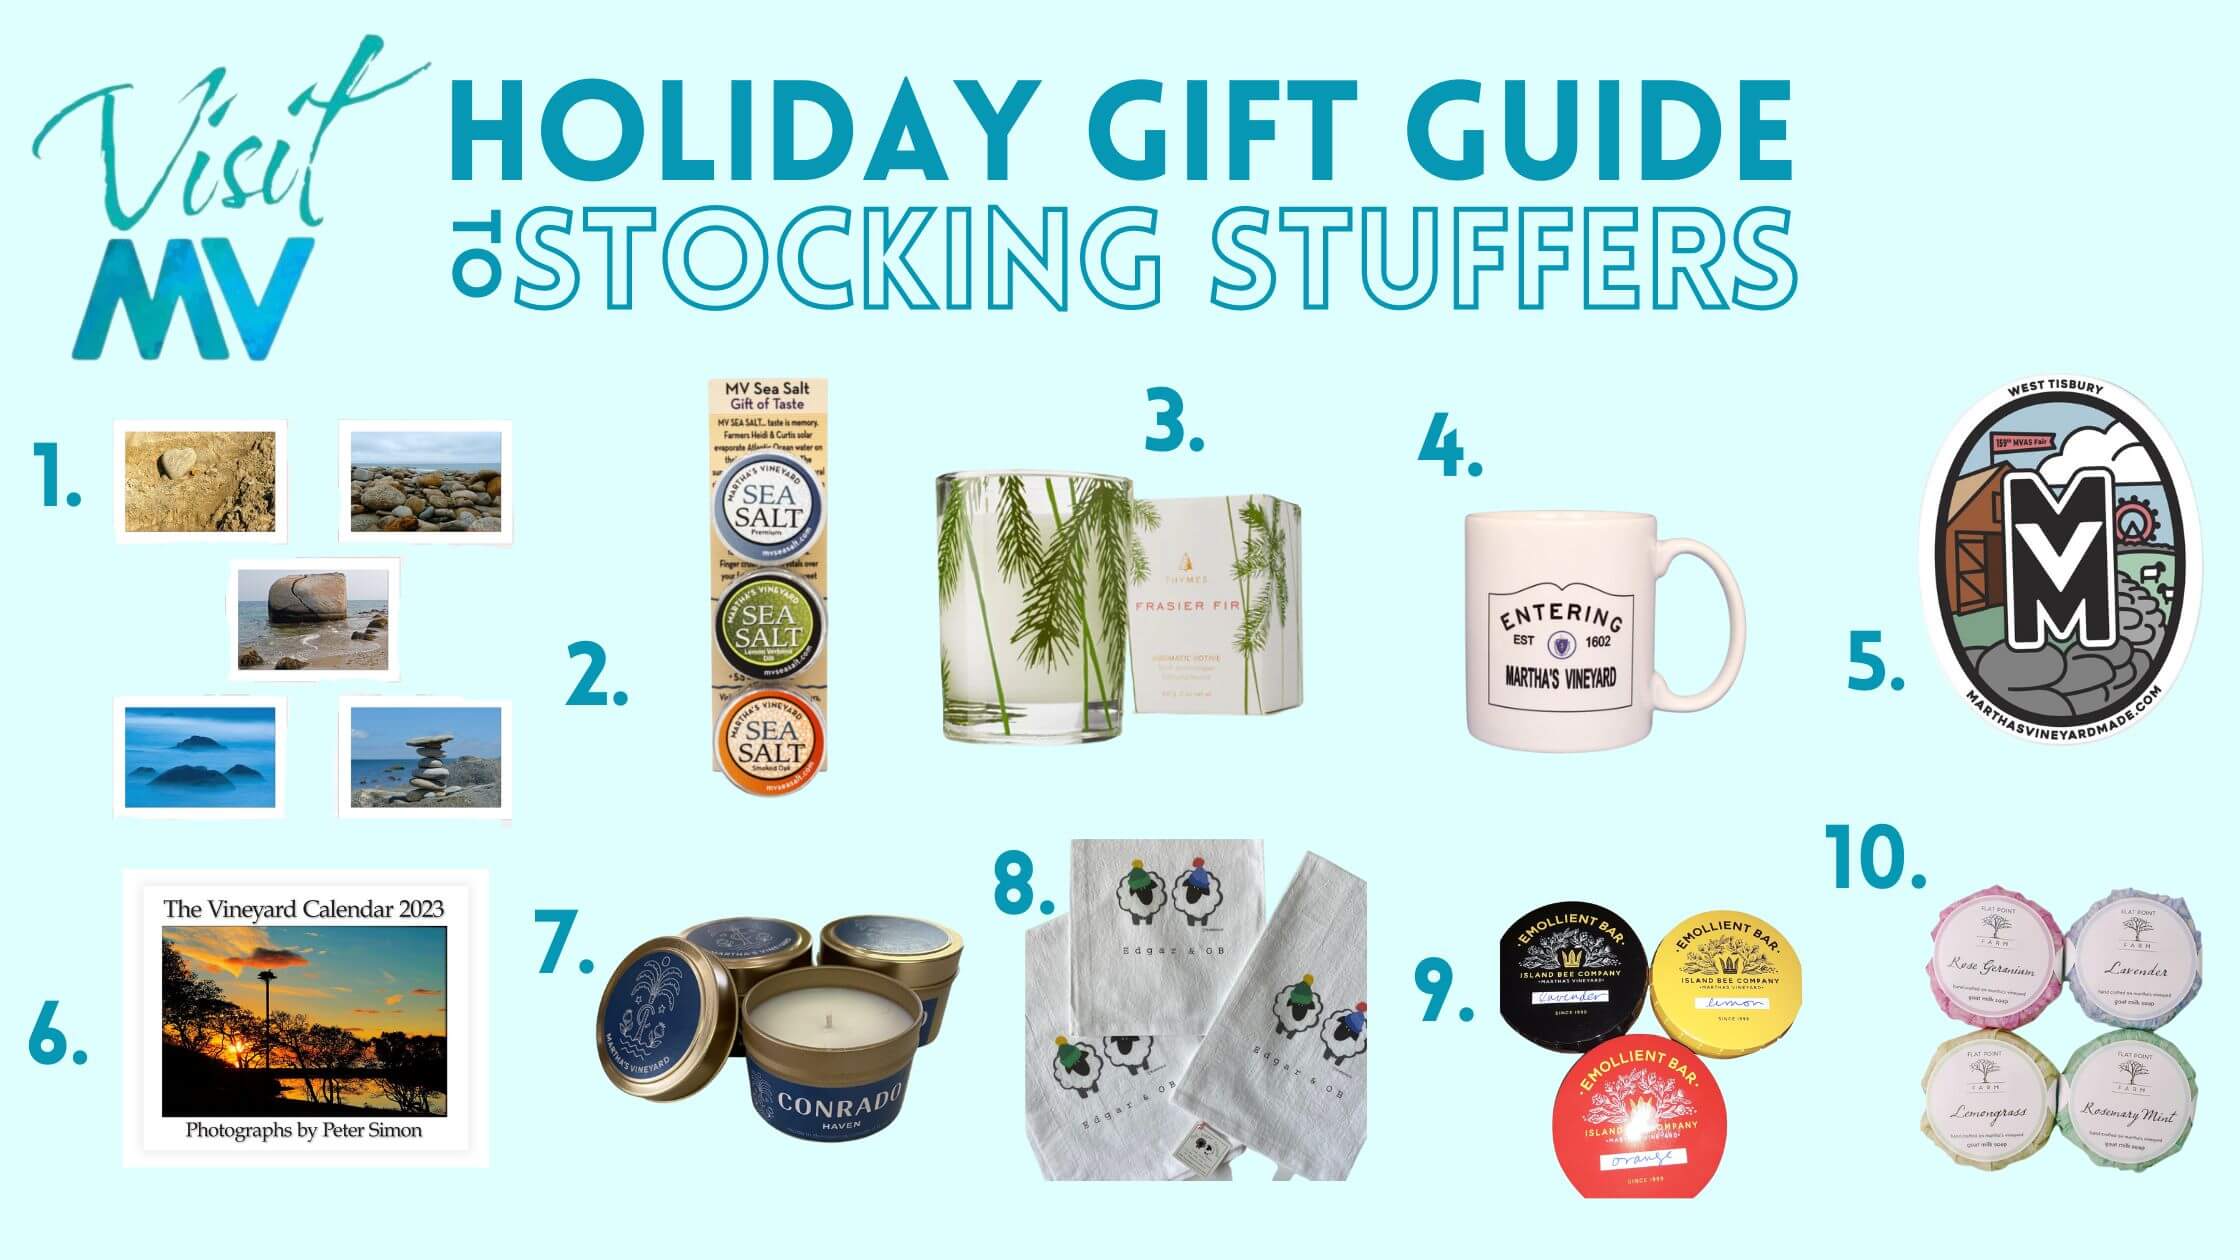 Holiday Gift Guide to Stocking Stuffers(2240 x 1260)